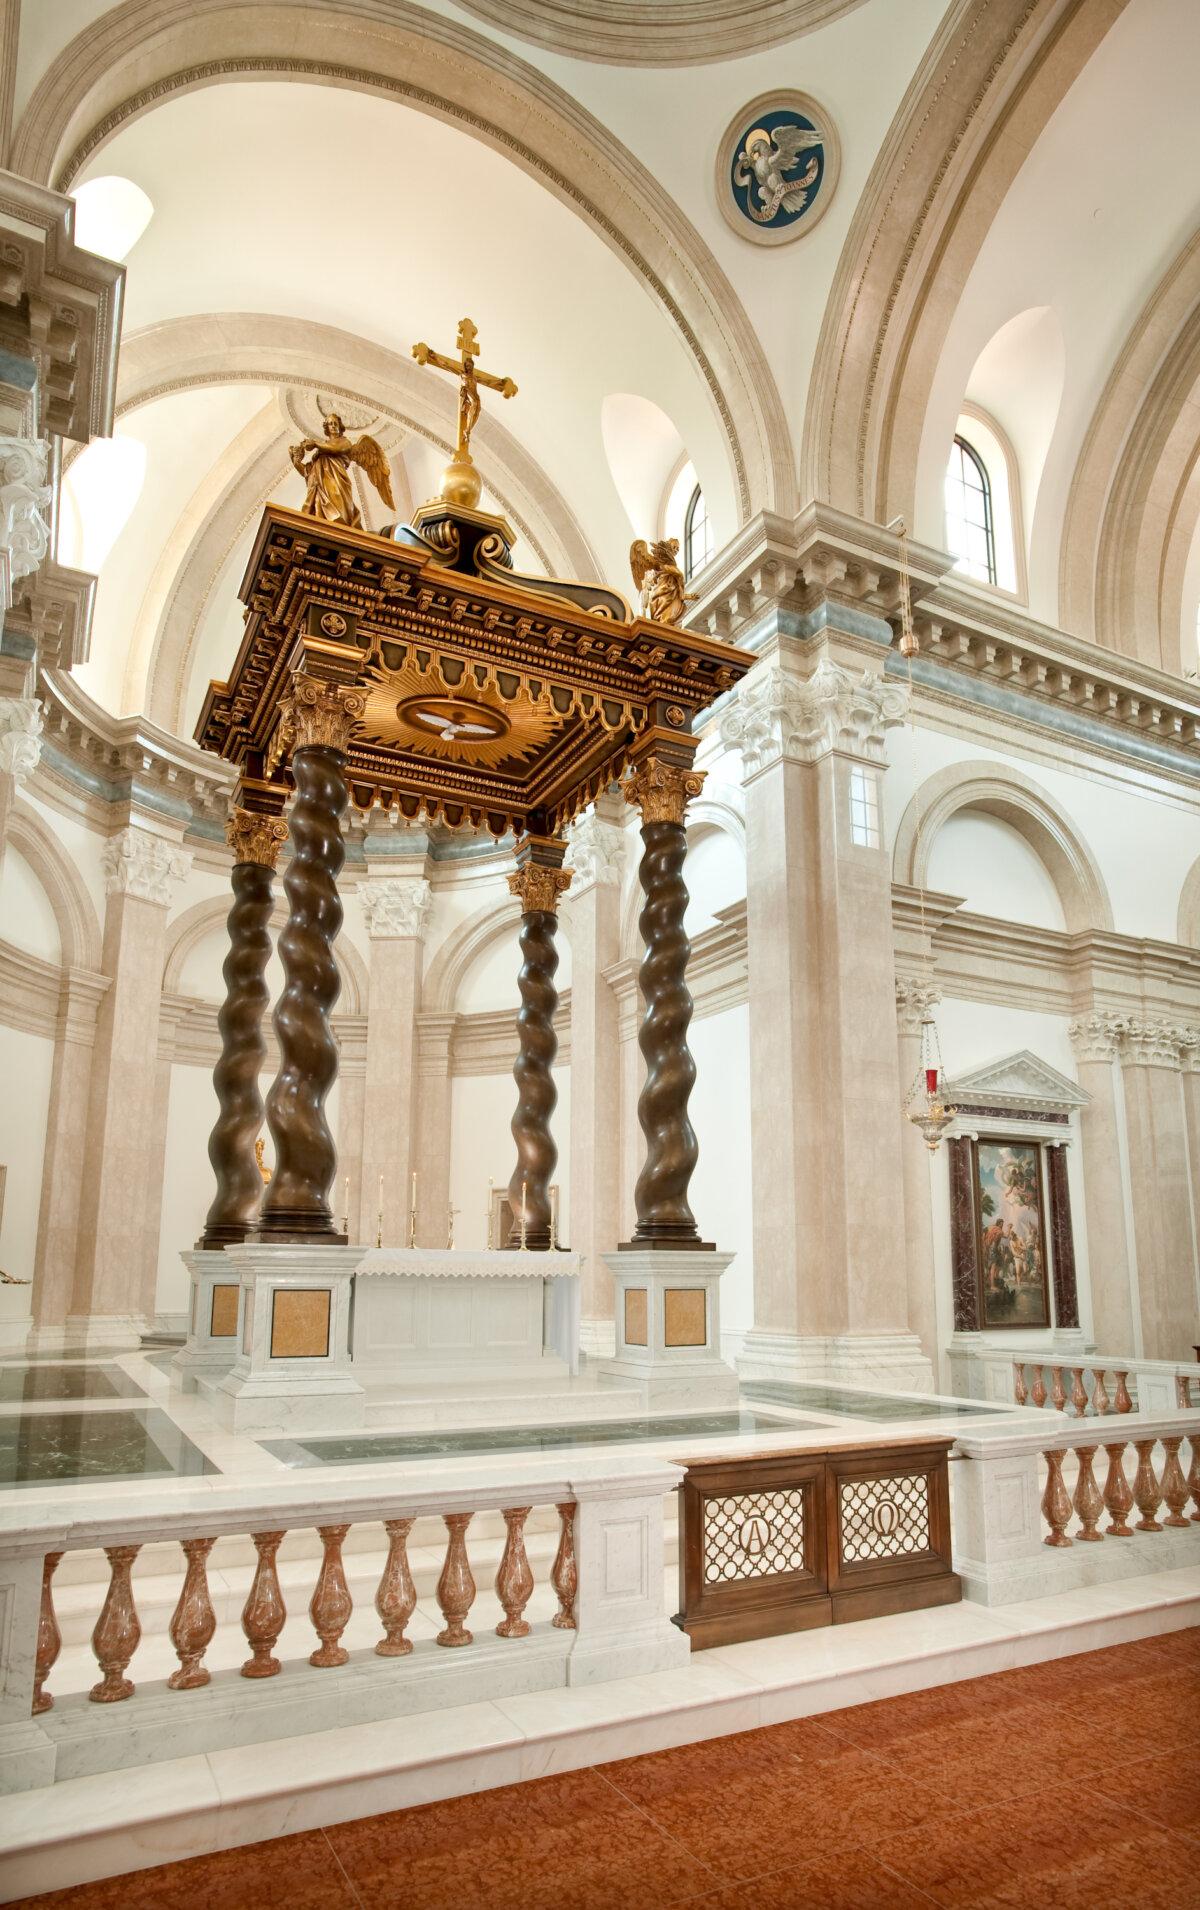 The centerpiece baldacchino, or canopy, traditionally placed over a church altar, is 34 feet high. Four Solomonic [referring to columns in the temple of Jerusalem during the reign of King Solomon] bronze columns are aesthetically curled to support a cover with elaborate and gilded details. The baldacchino’s design was inspired by one at St. Peter’s in Rome. (Courtesy of Thomas Aquinas College)